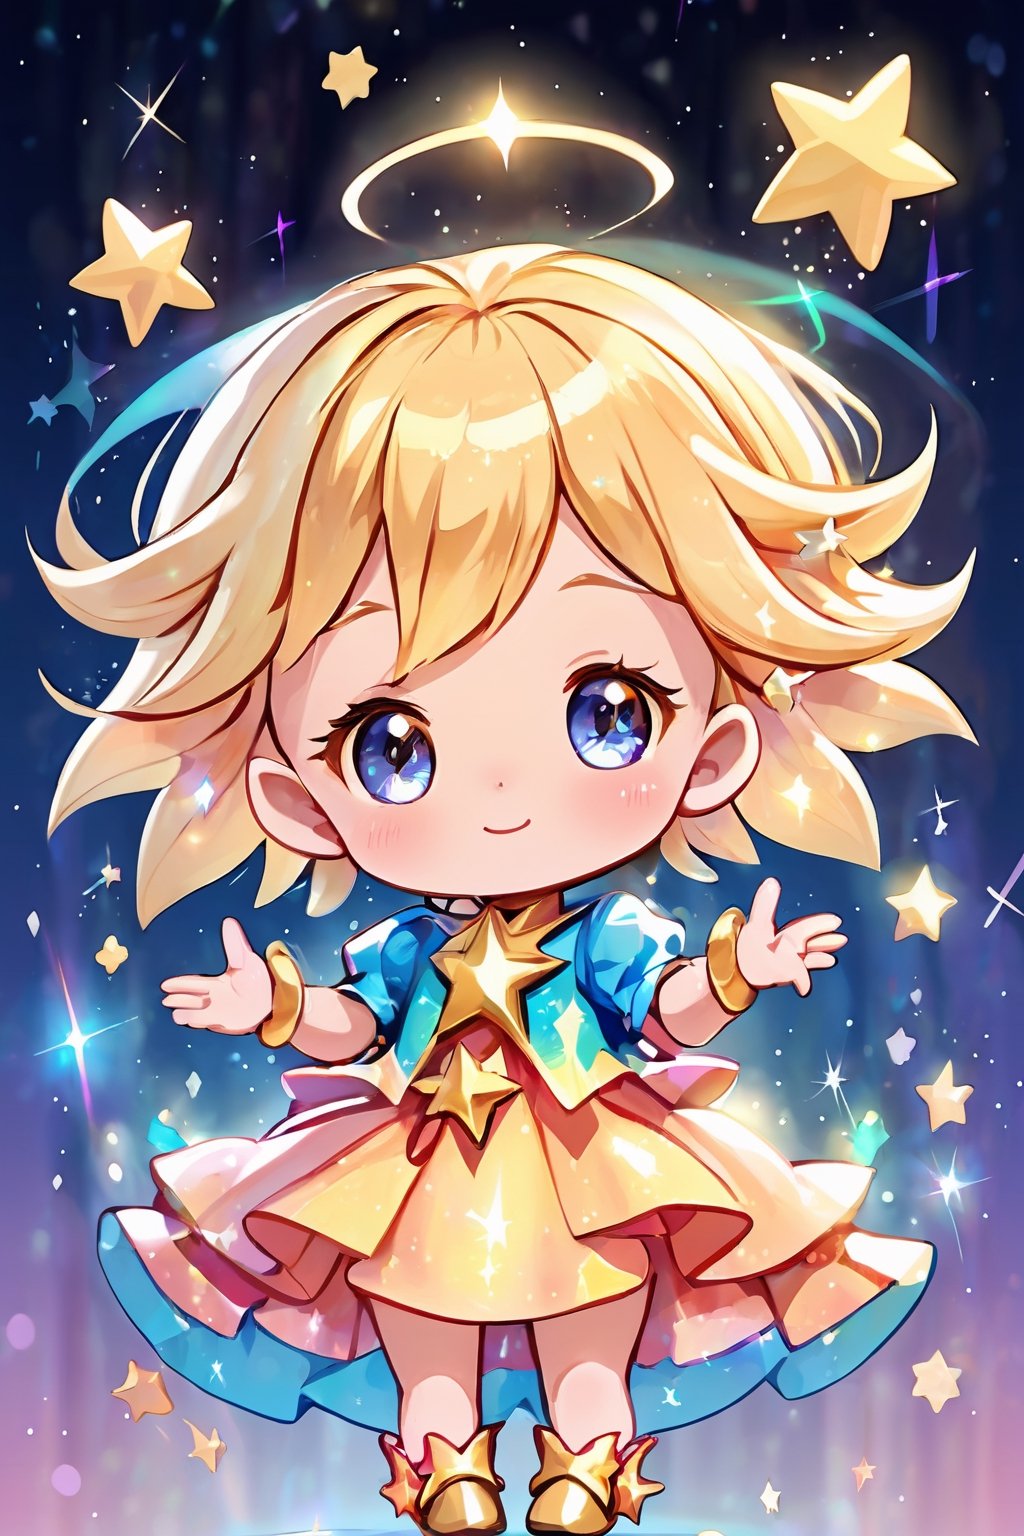 (cute twinkle star background:1.3), light colors, (1 little magician girl:1.2), translucent layer, blend with twinkle star